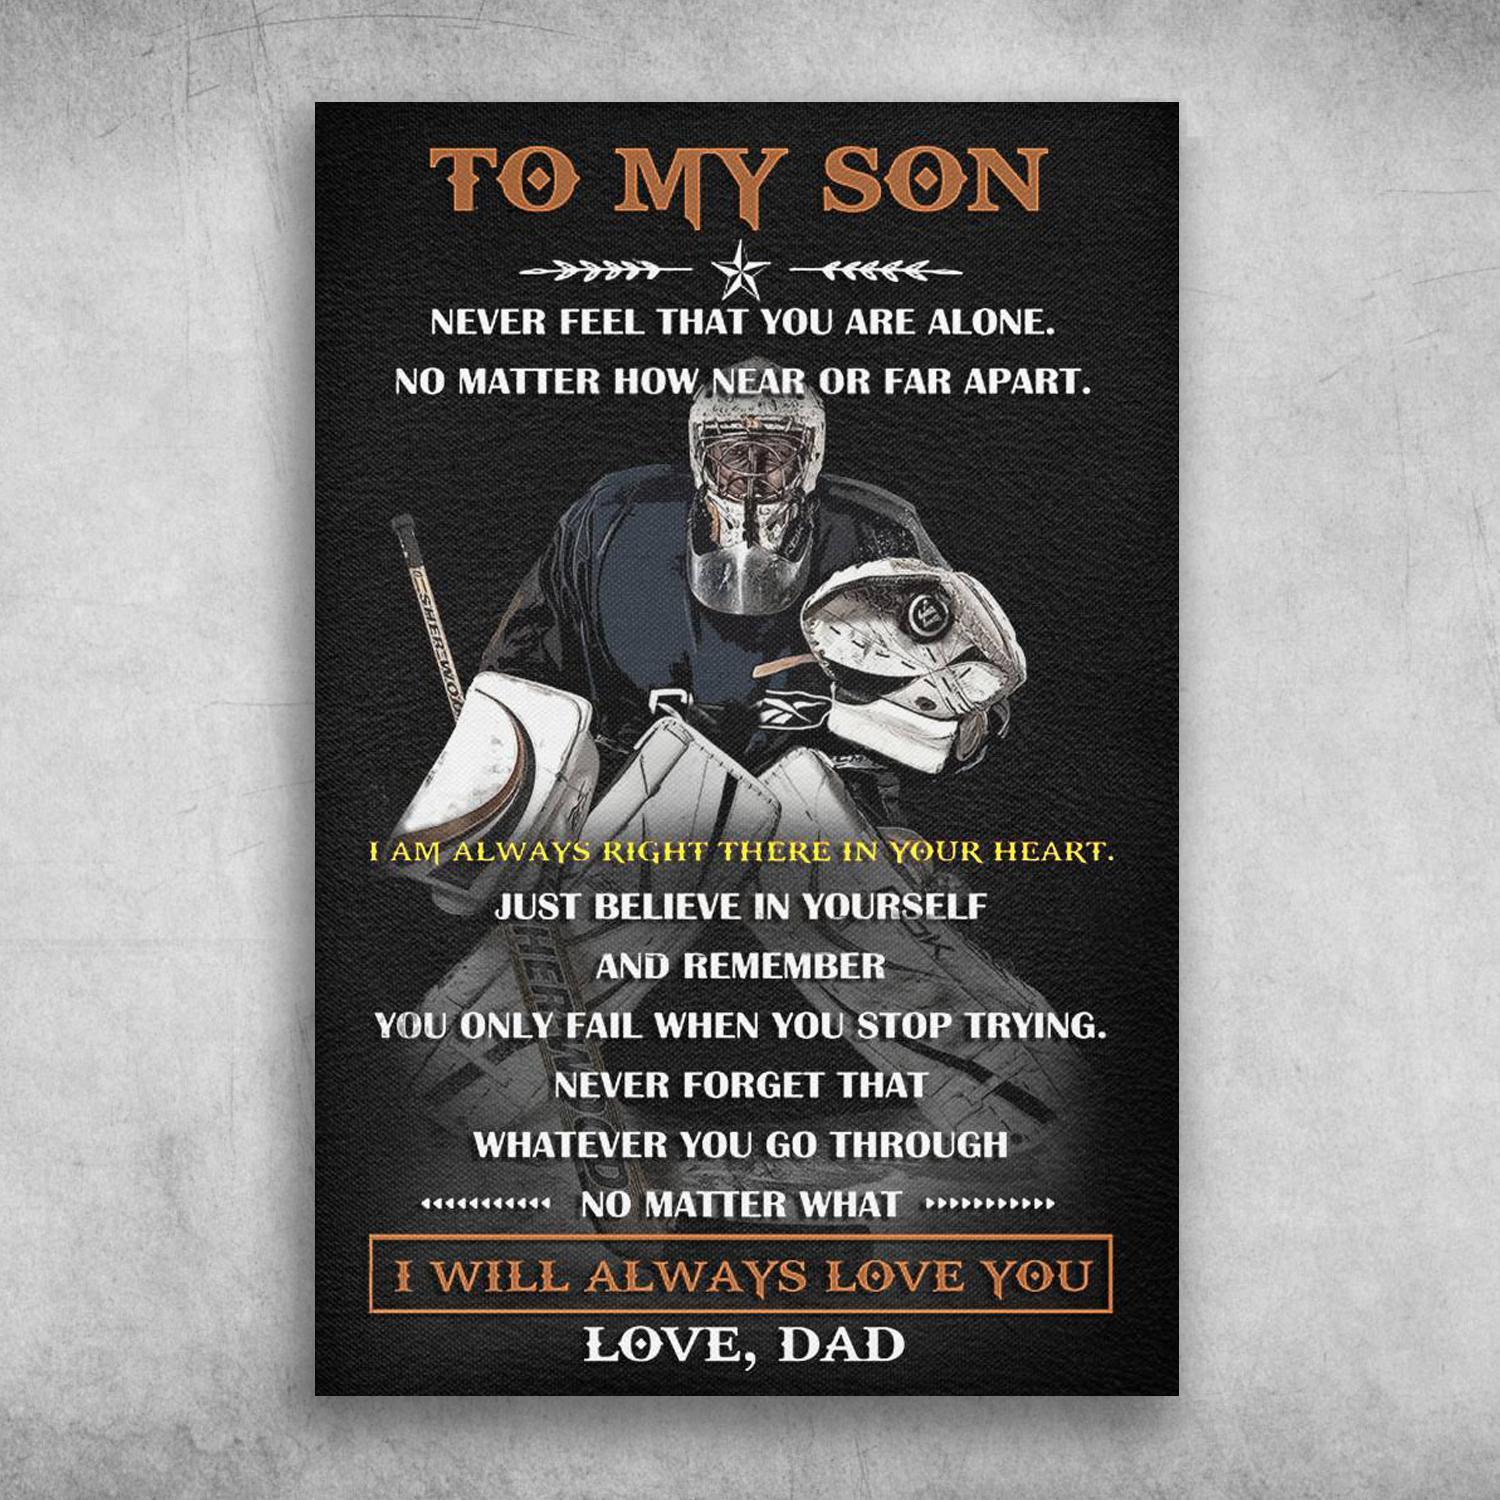 To My Son You Only Fail When You Stop Trying Love Dad Poster Print Wall Art Canvas Wall Decor